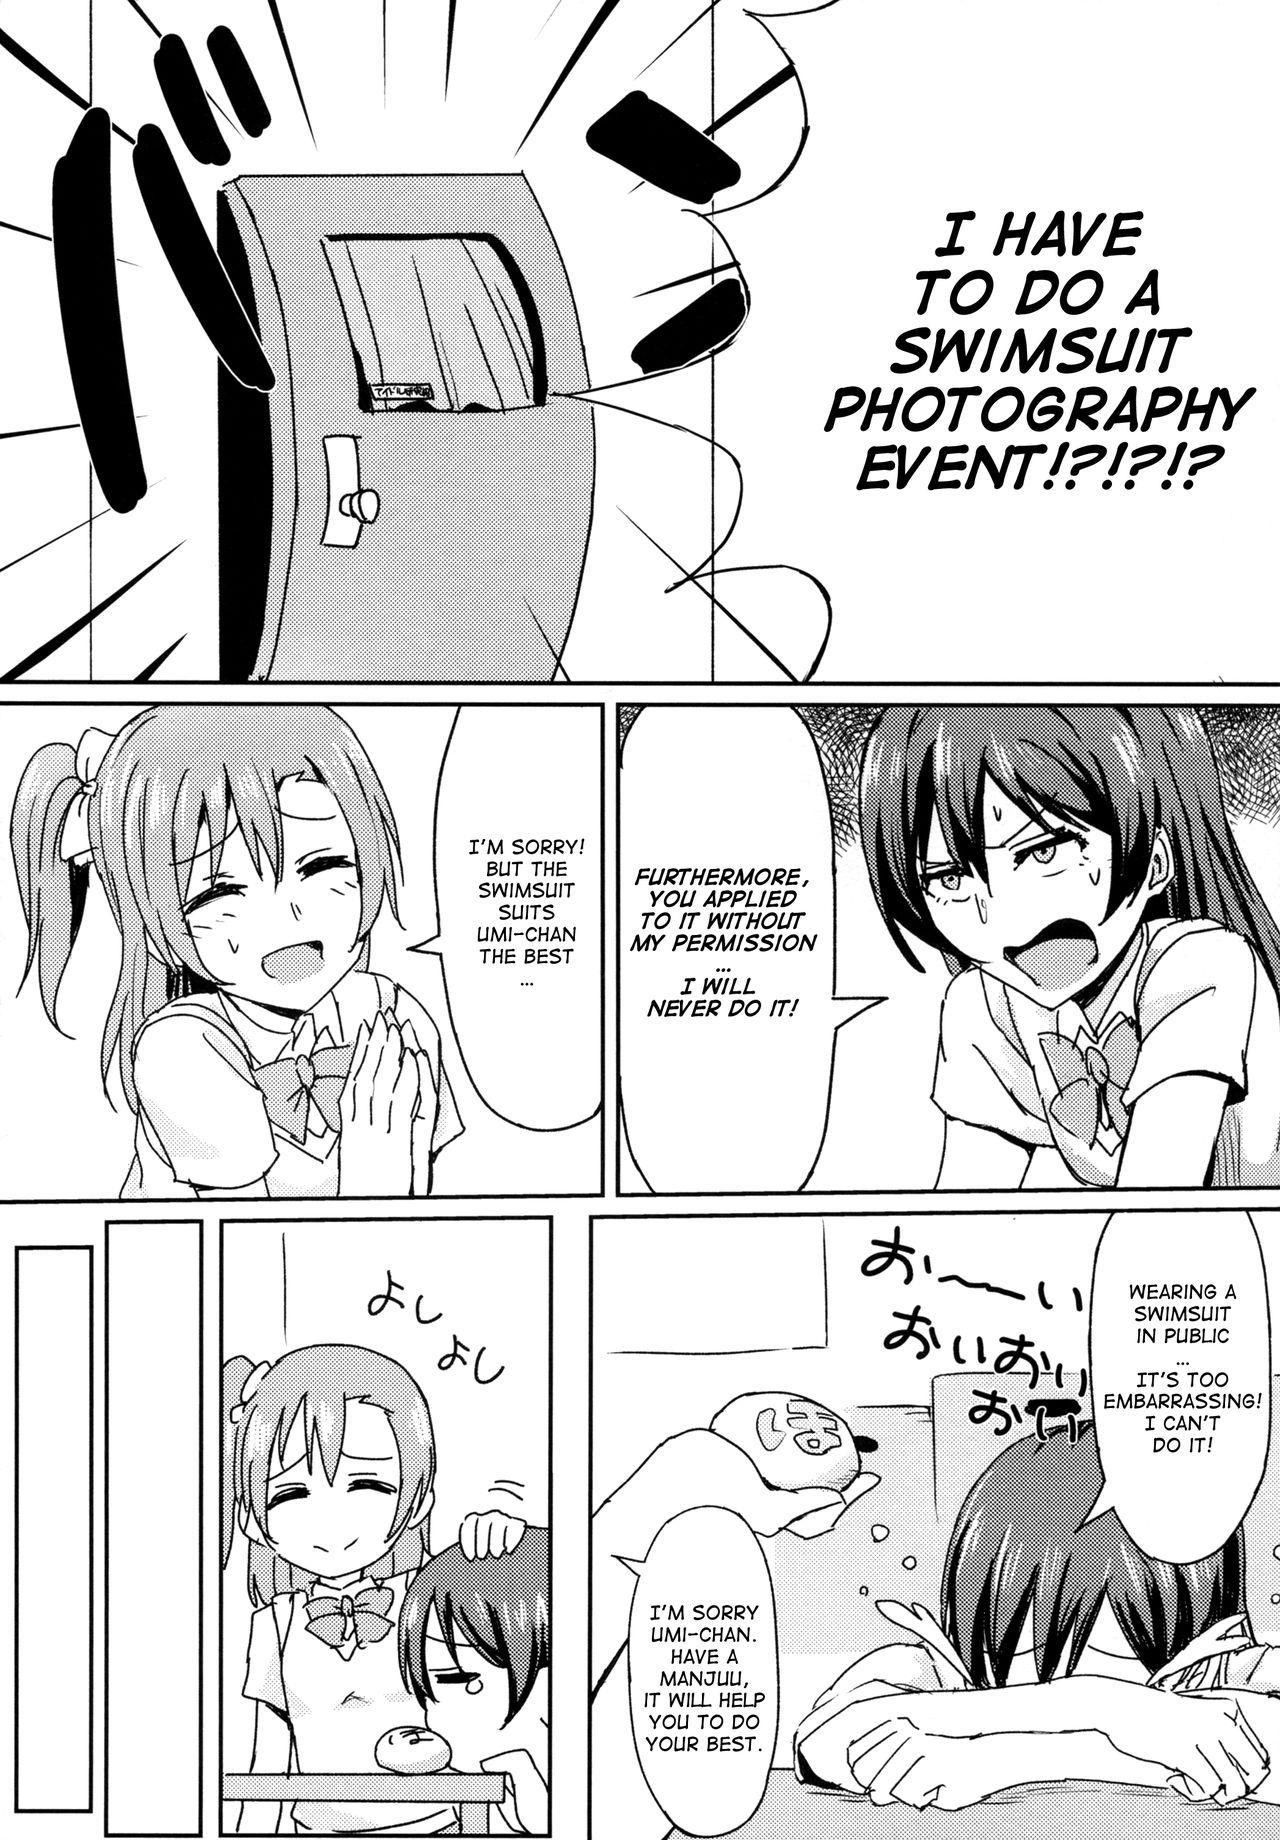 Best Blowjobs Hah,Wrench This! - Love live Lick - Page 5